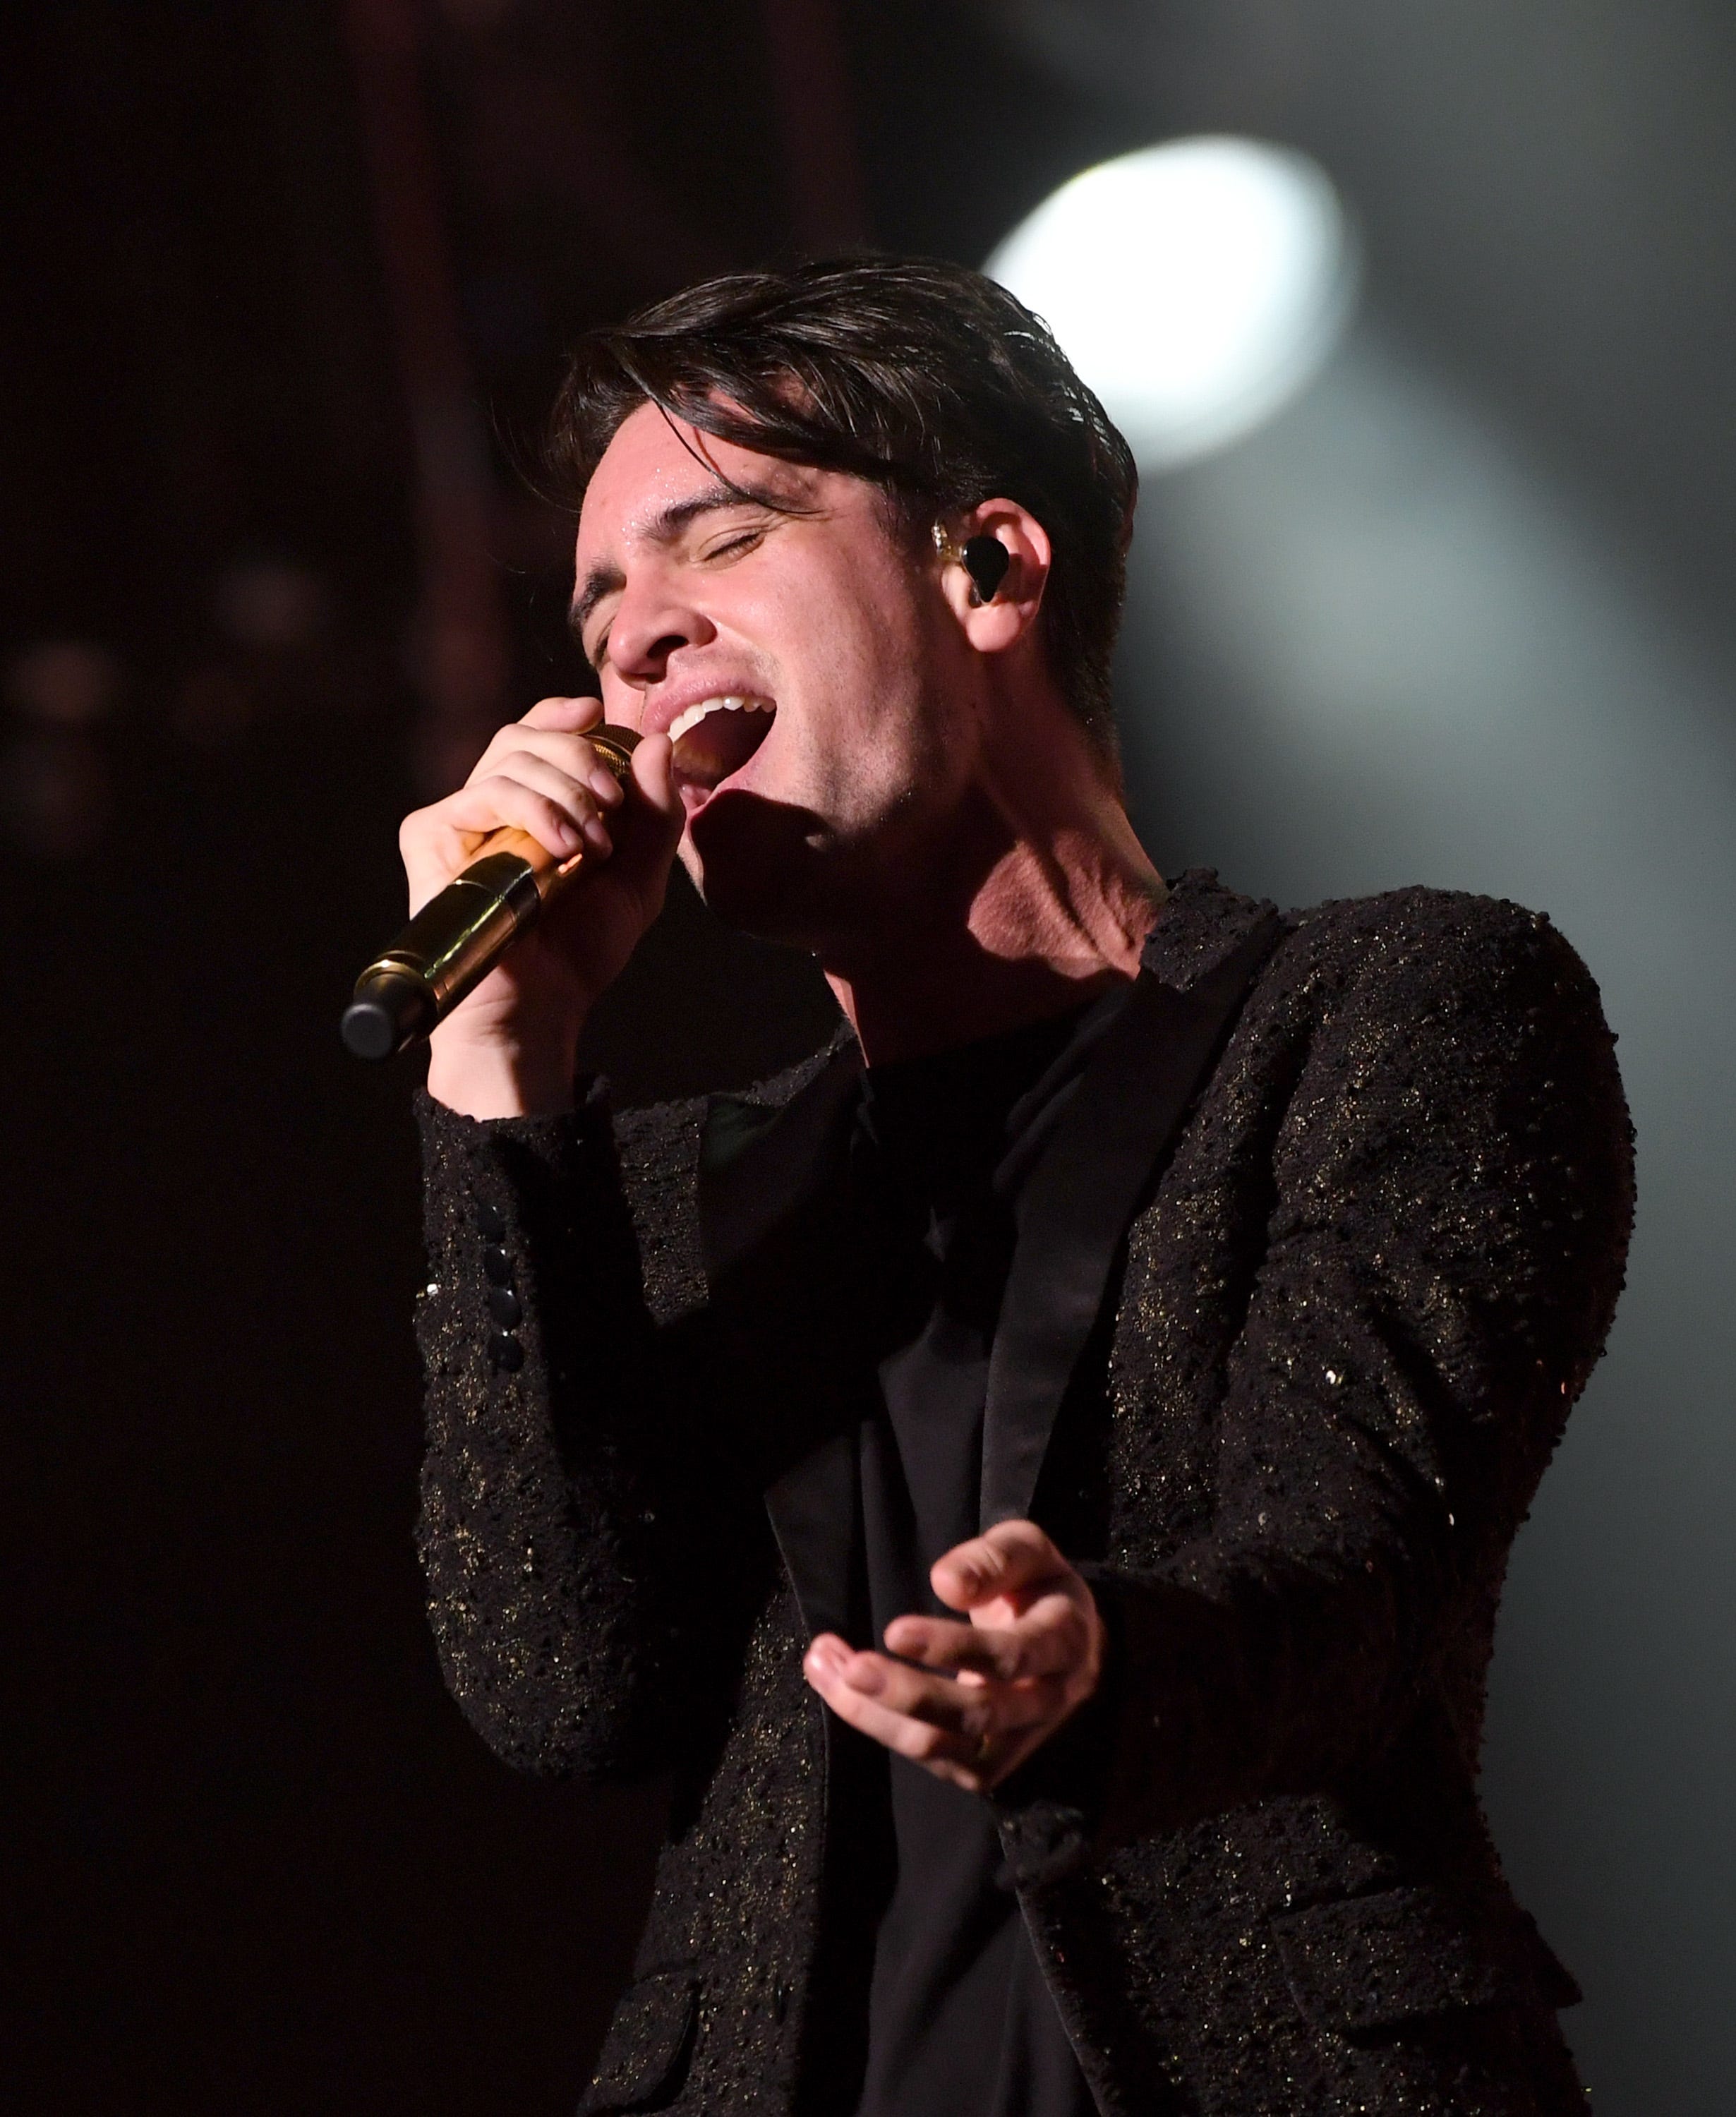 Panic! At the Disco is breaking up, Brendon Urie announces: 'Sometimes a journey must end'